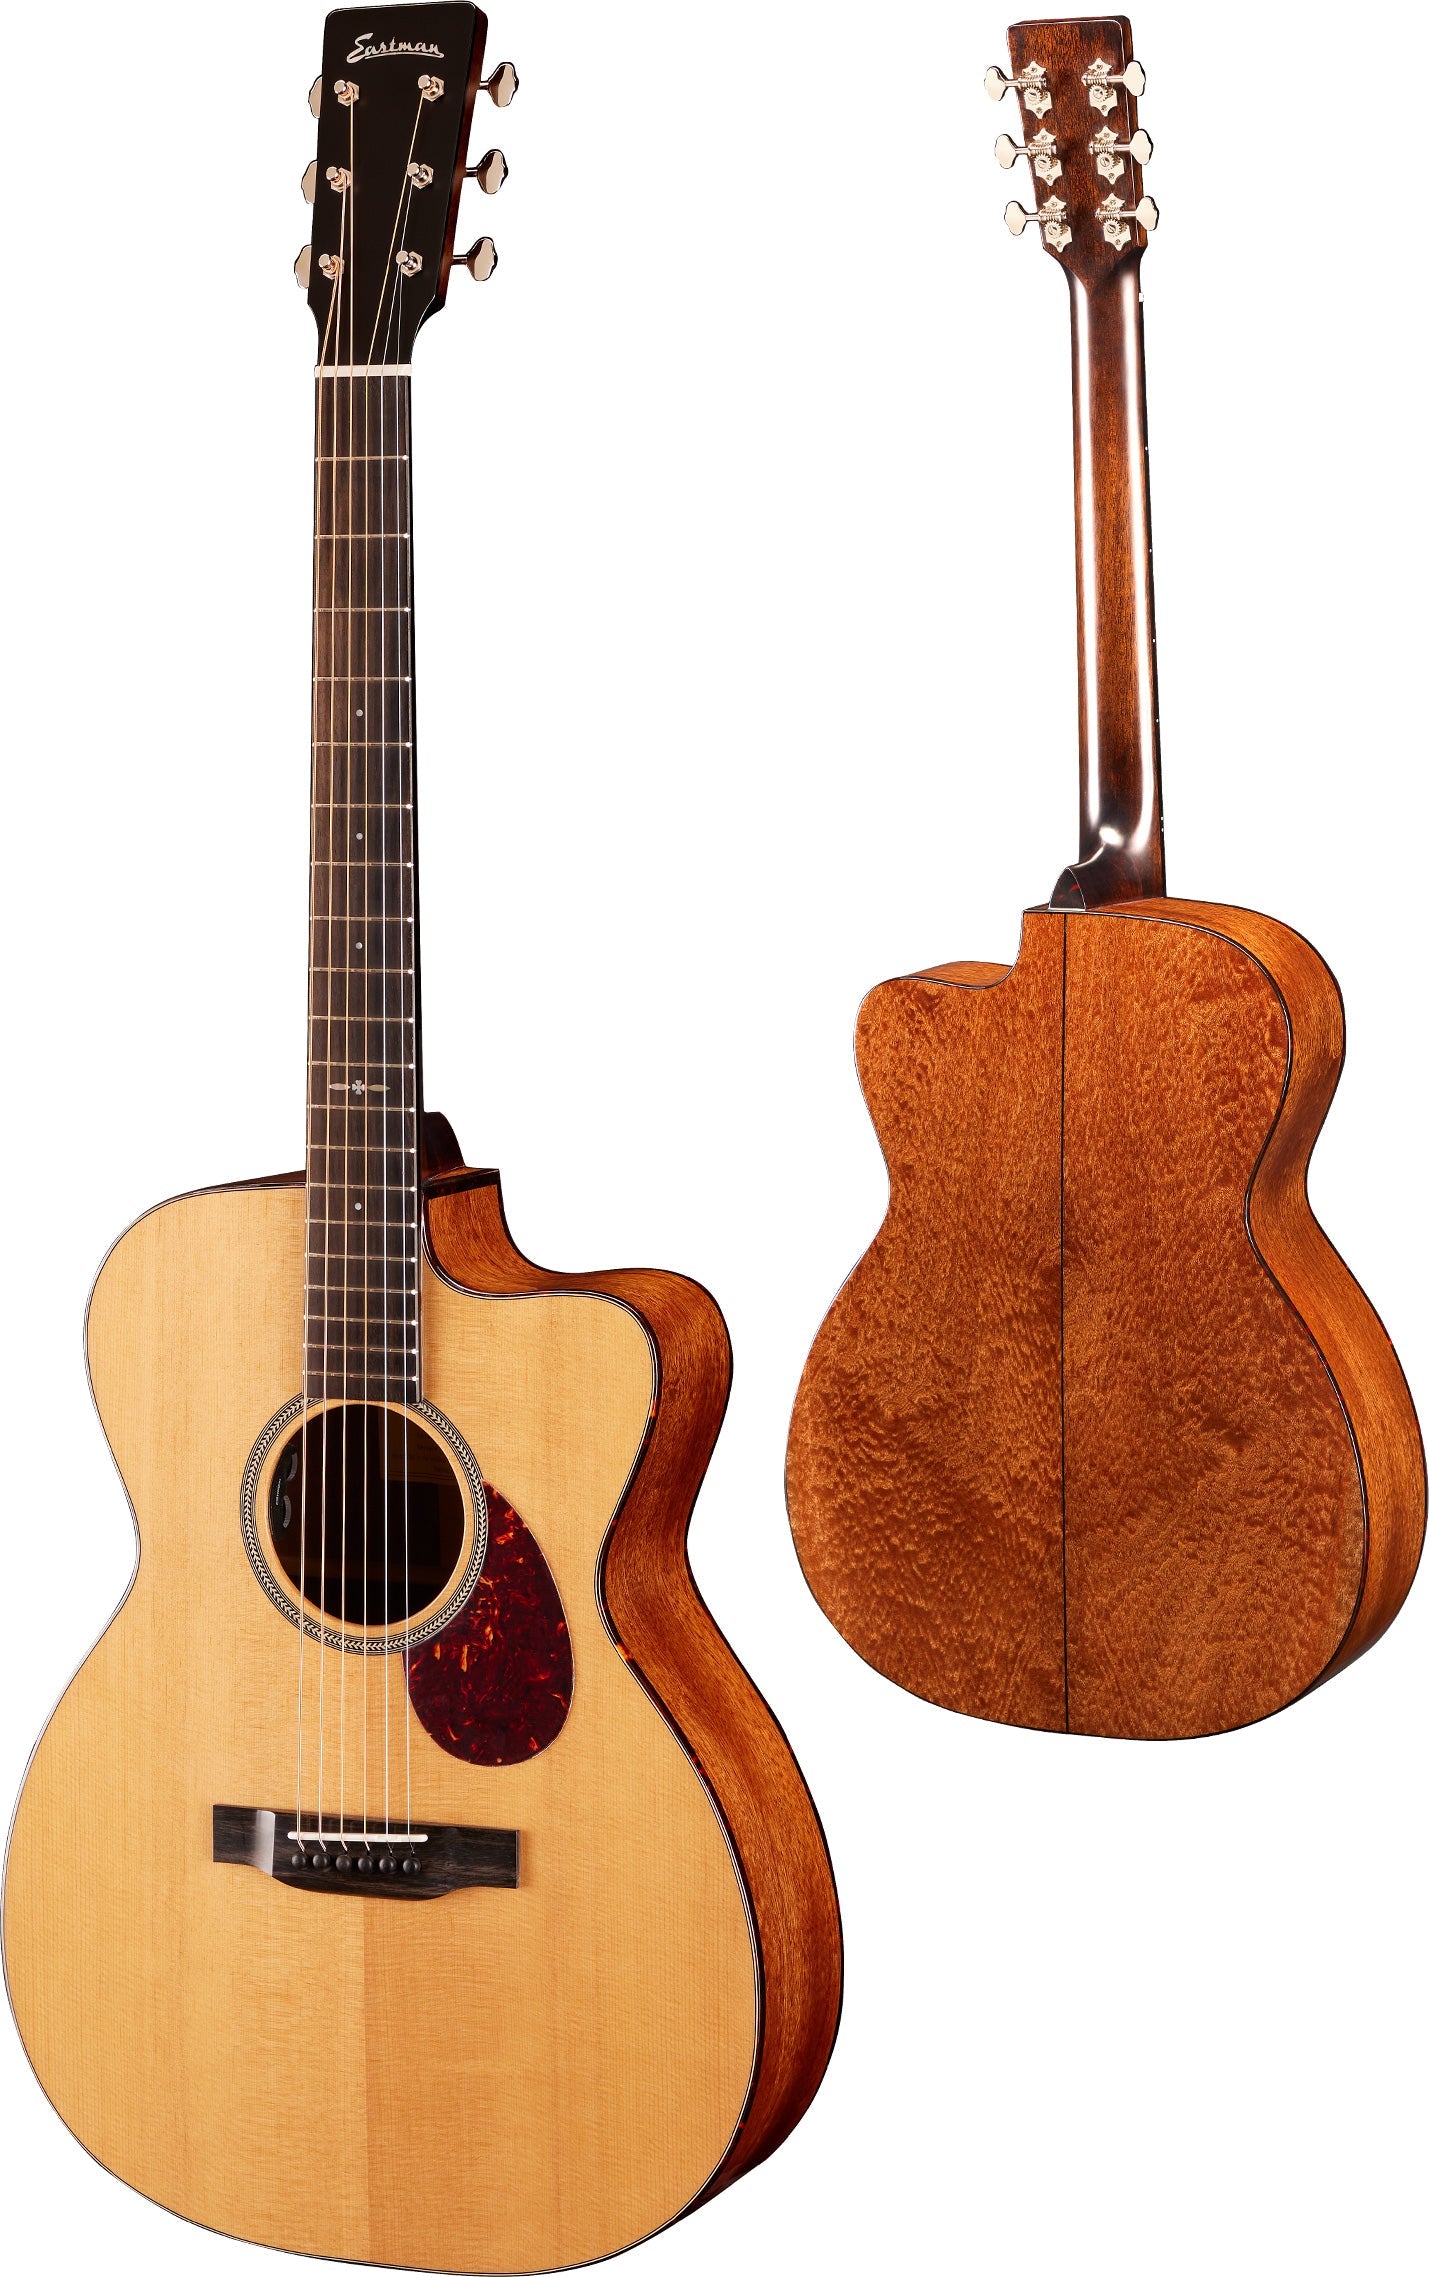 Eastman E1OMCE-SPECIAL, natural, Acoustic Guitar, Electro Acoustic Guitar for sale at Richards Guitars.